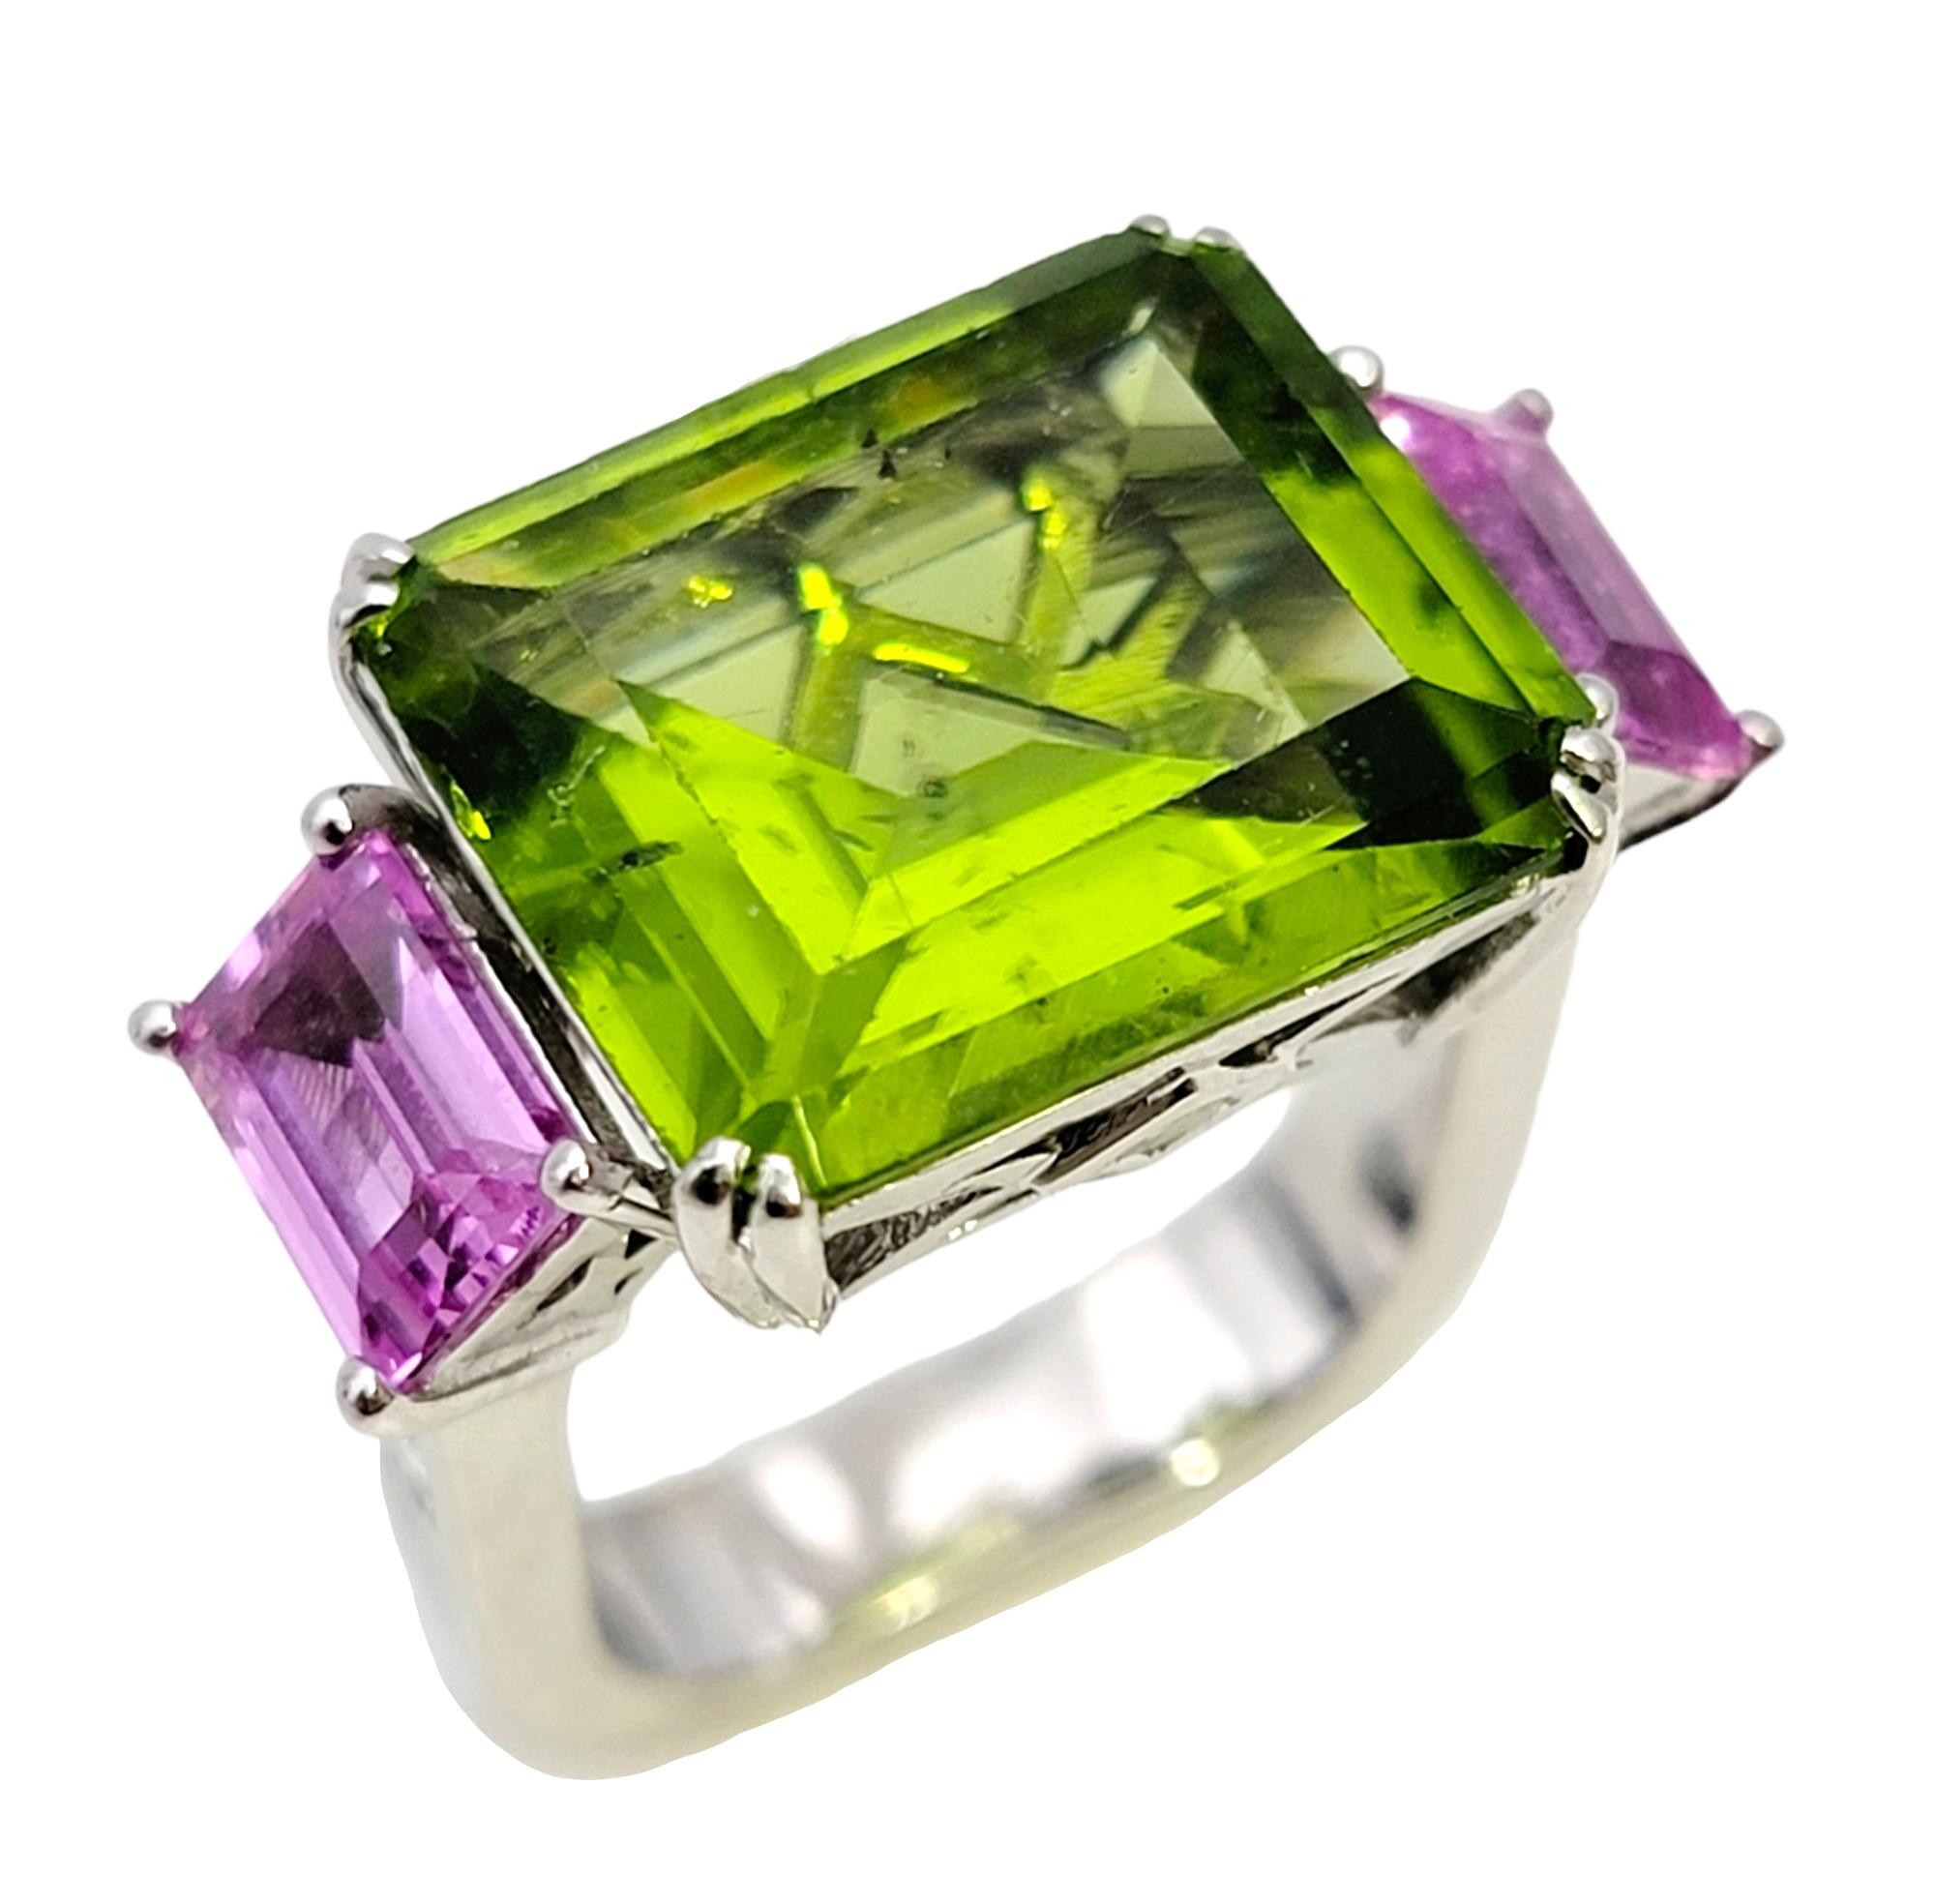 Emerald Cut 11.42 Carat Peridot, Pink Sapphire and Diamond Euro Shank Band Ring In Good Condition For Sale In Scottsdale, AZ